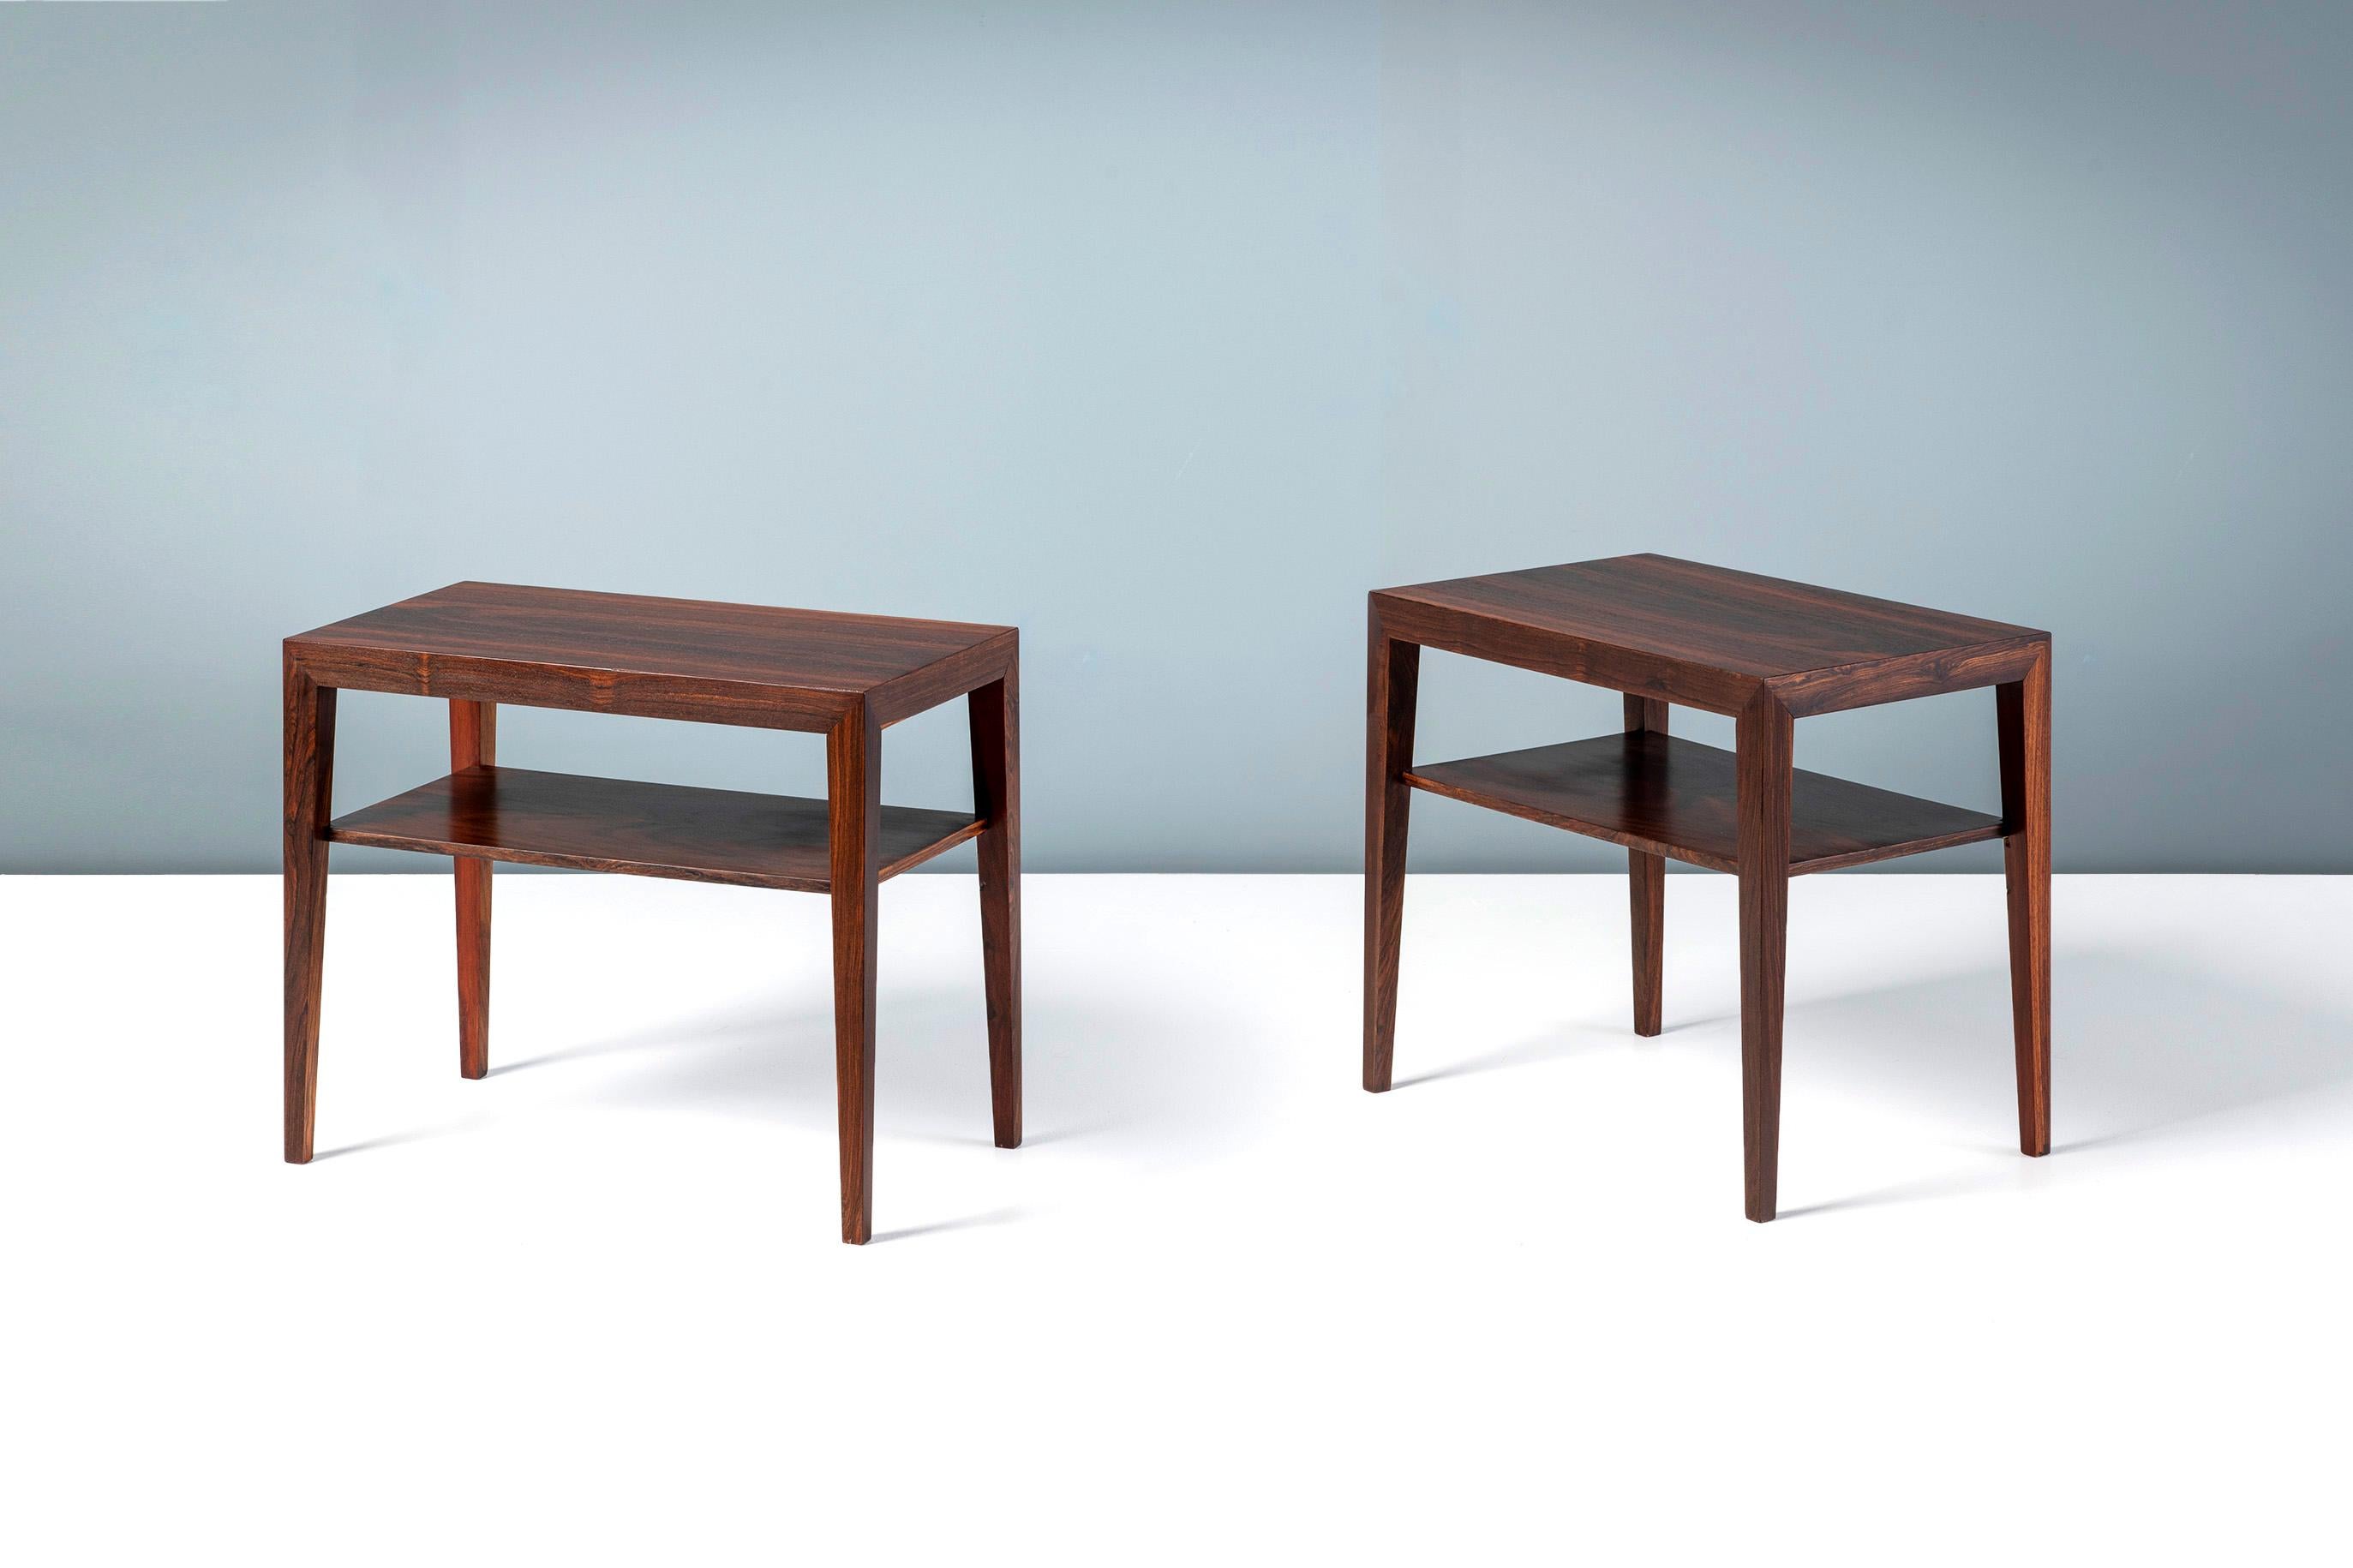 Severin Hansen - Rosewood side Tables, 1950s.

Pair of side tables with shelves below. Produced by Haslev Mobelsnedkeri, Denmark in figured rosewood veneer with solid legs. Refinished in Danish oil at our workshops in London.